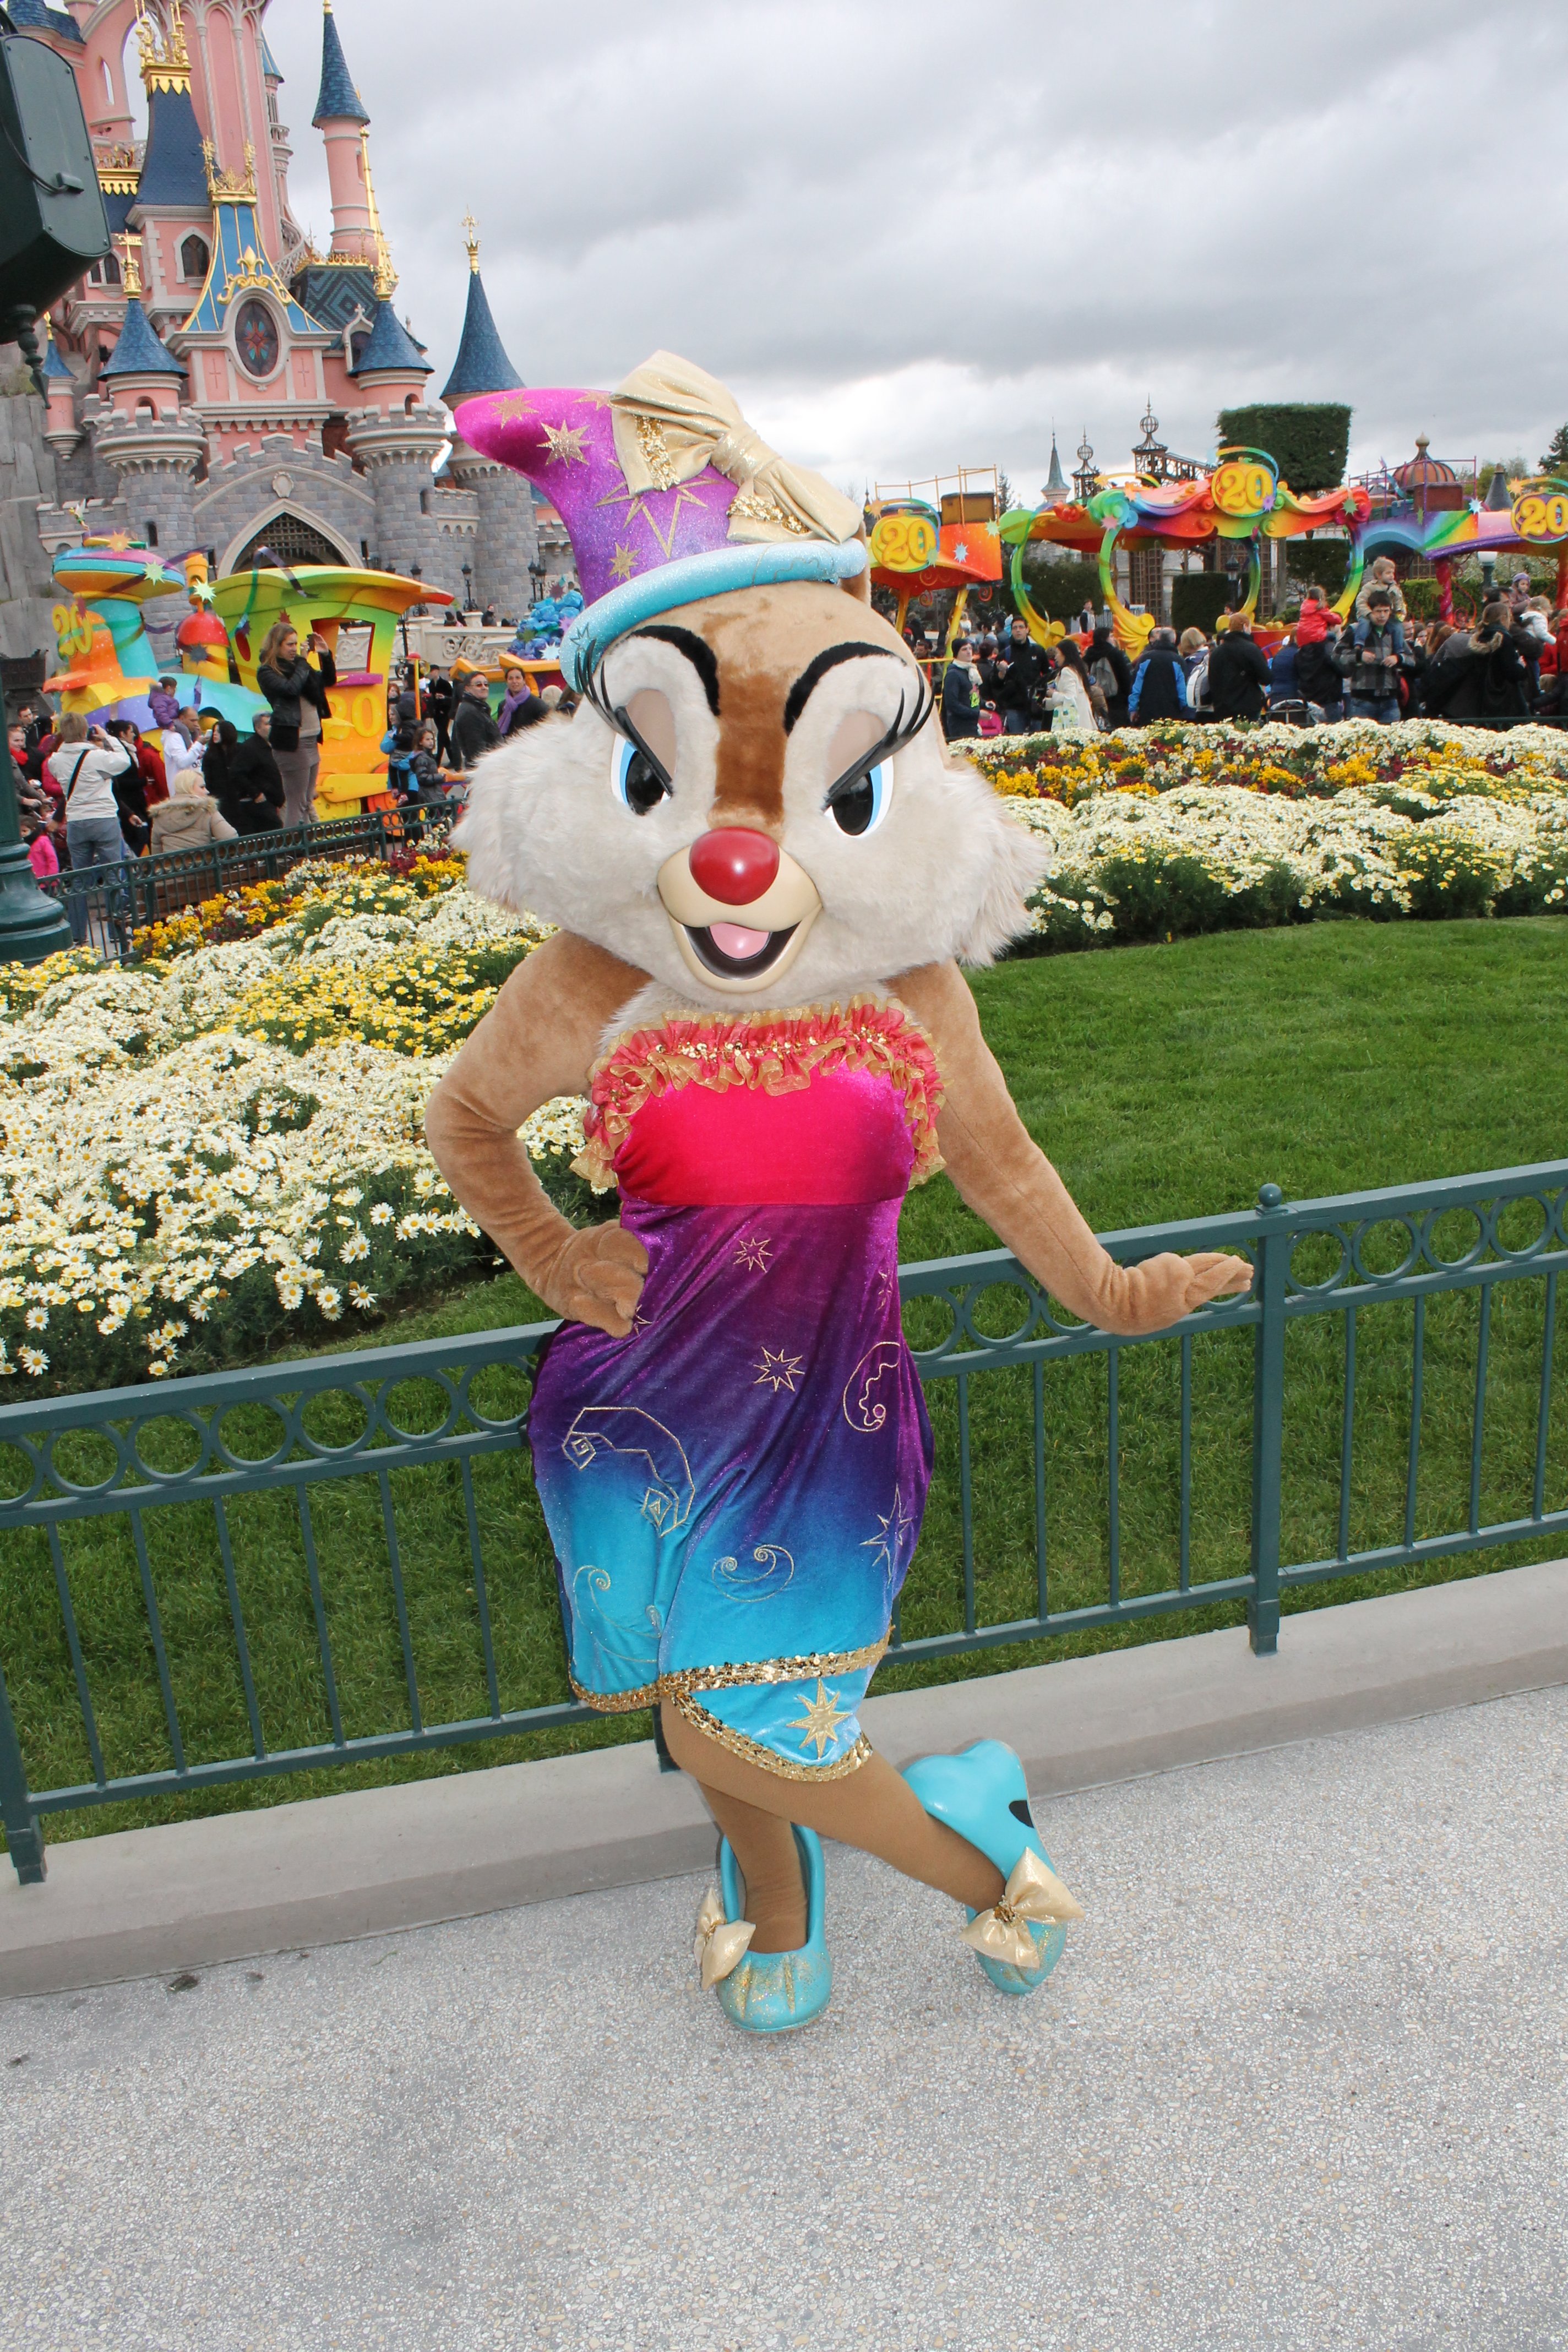 Clarice in her 20th Anniversary outfit. She can be seen in this outfit daily during the 20th Anniversary Celebration